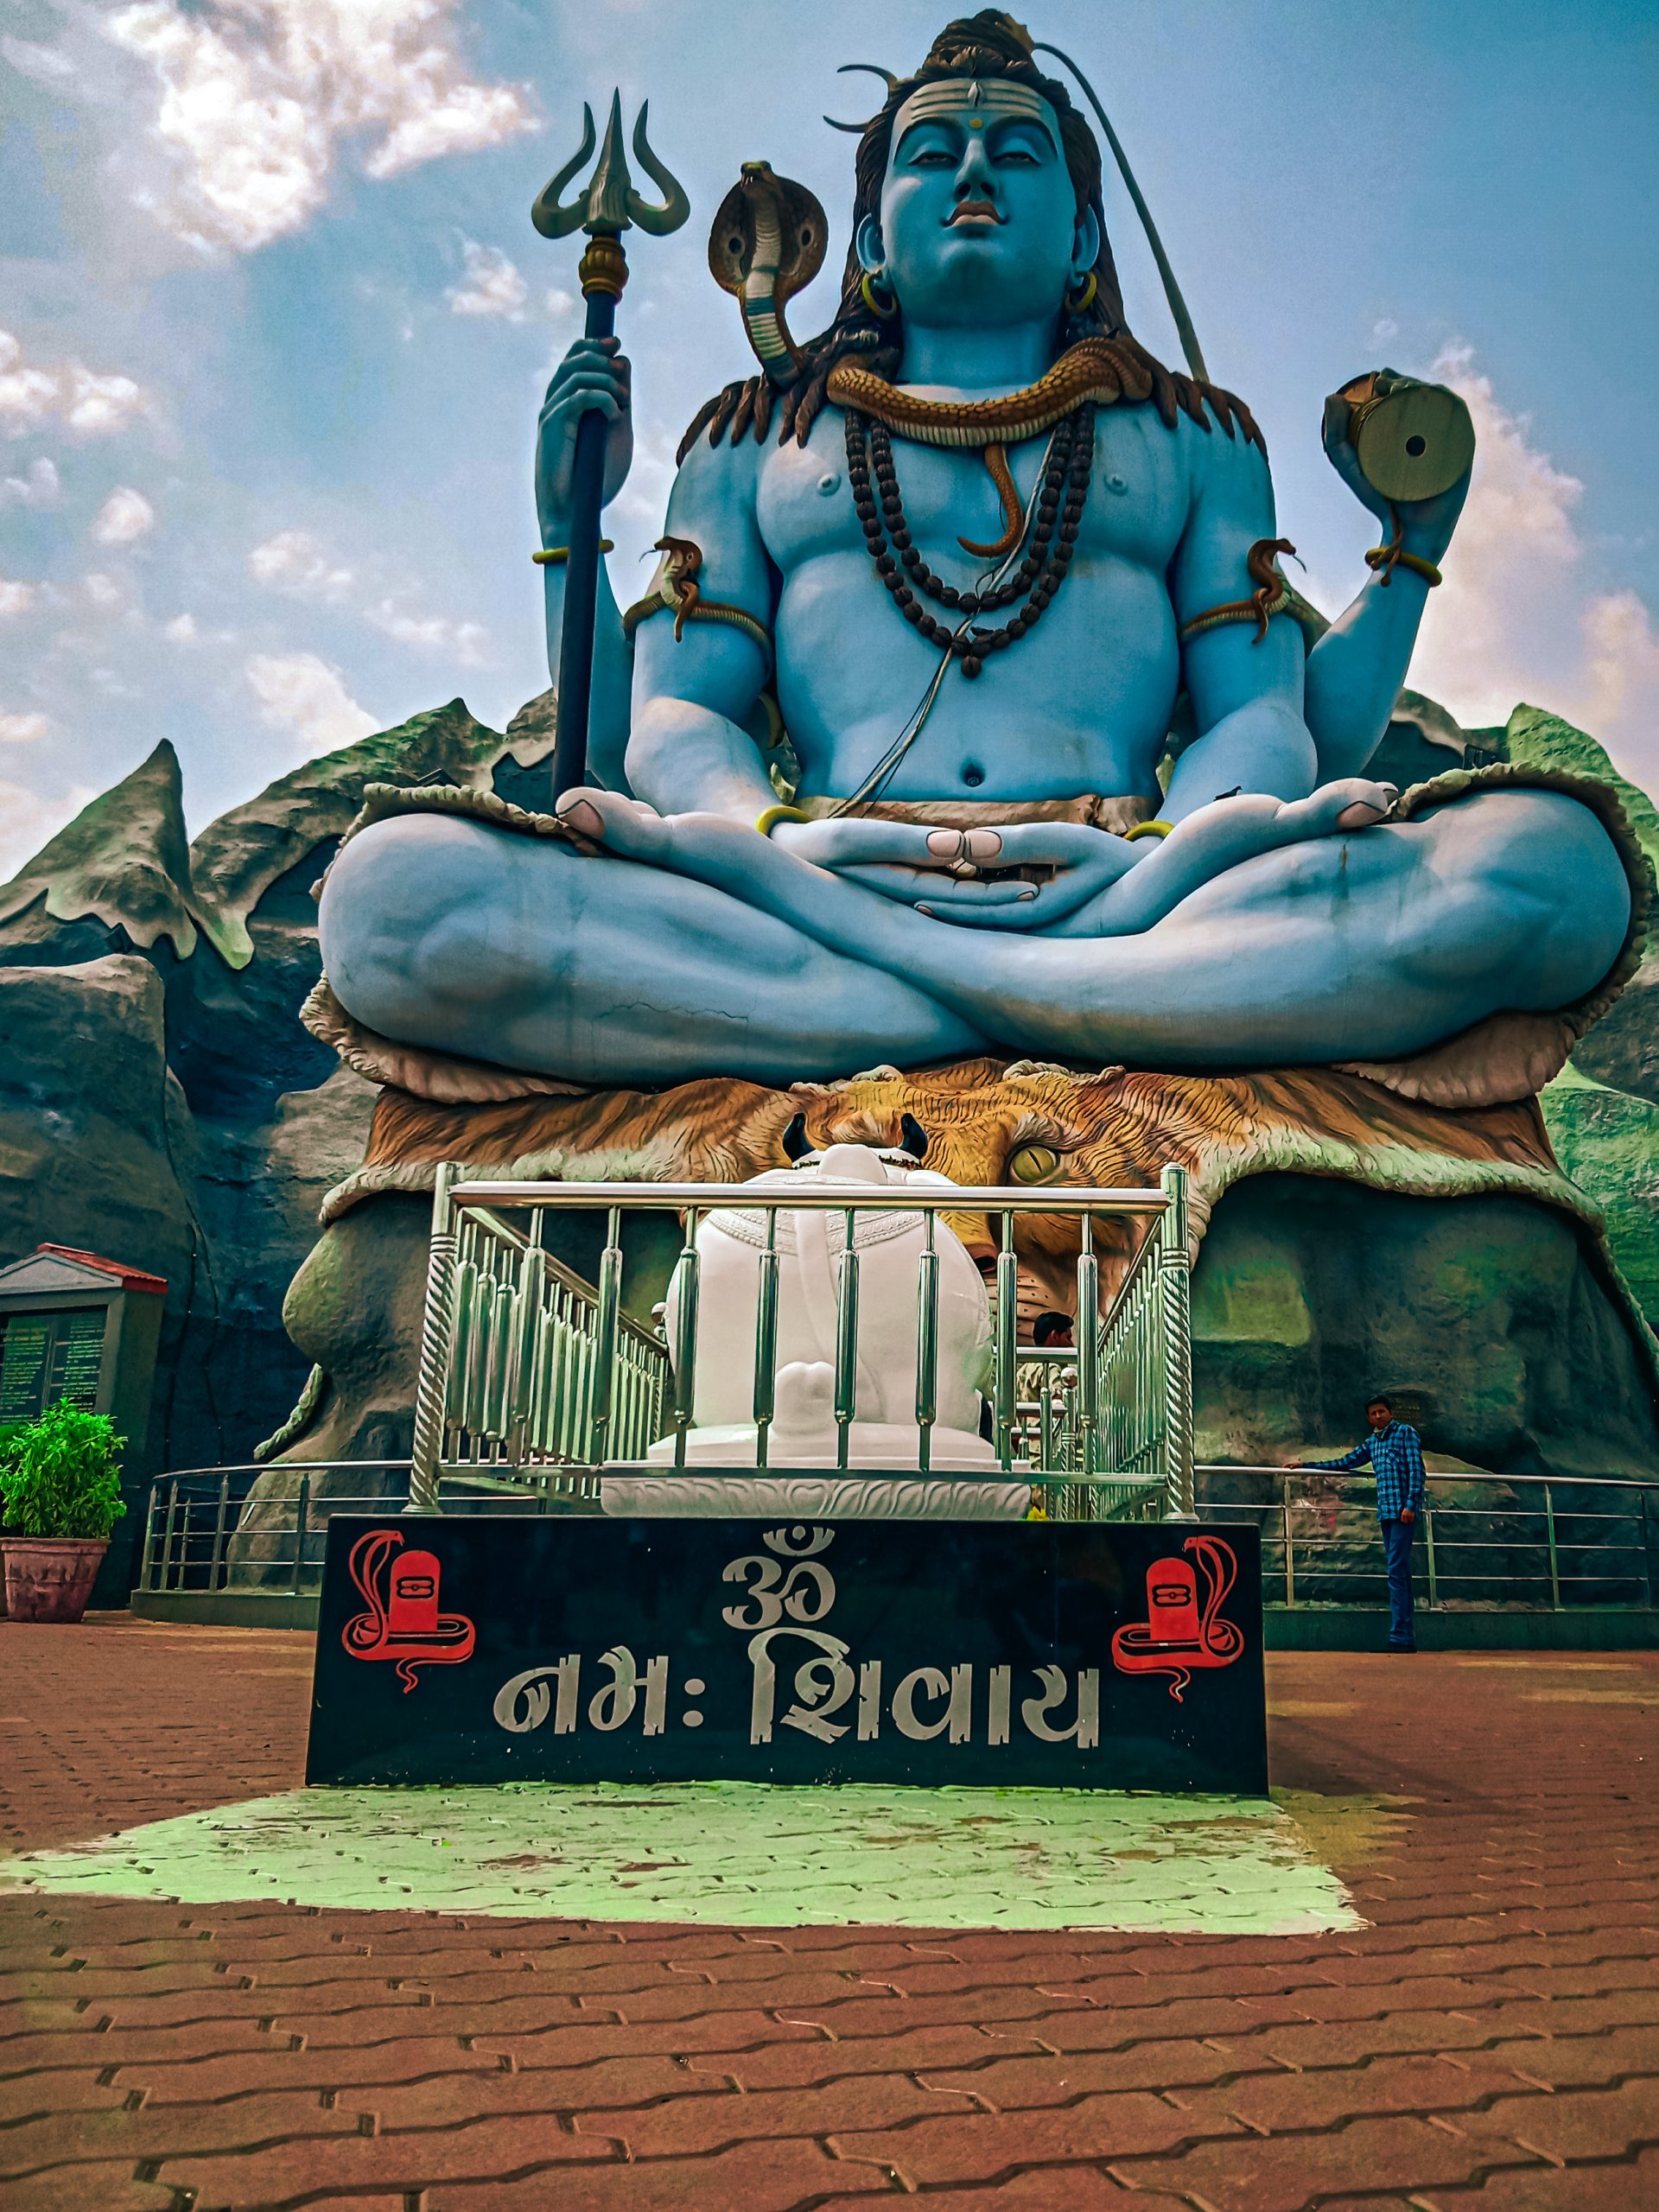 A giant statue of Lord Shiva